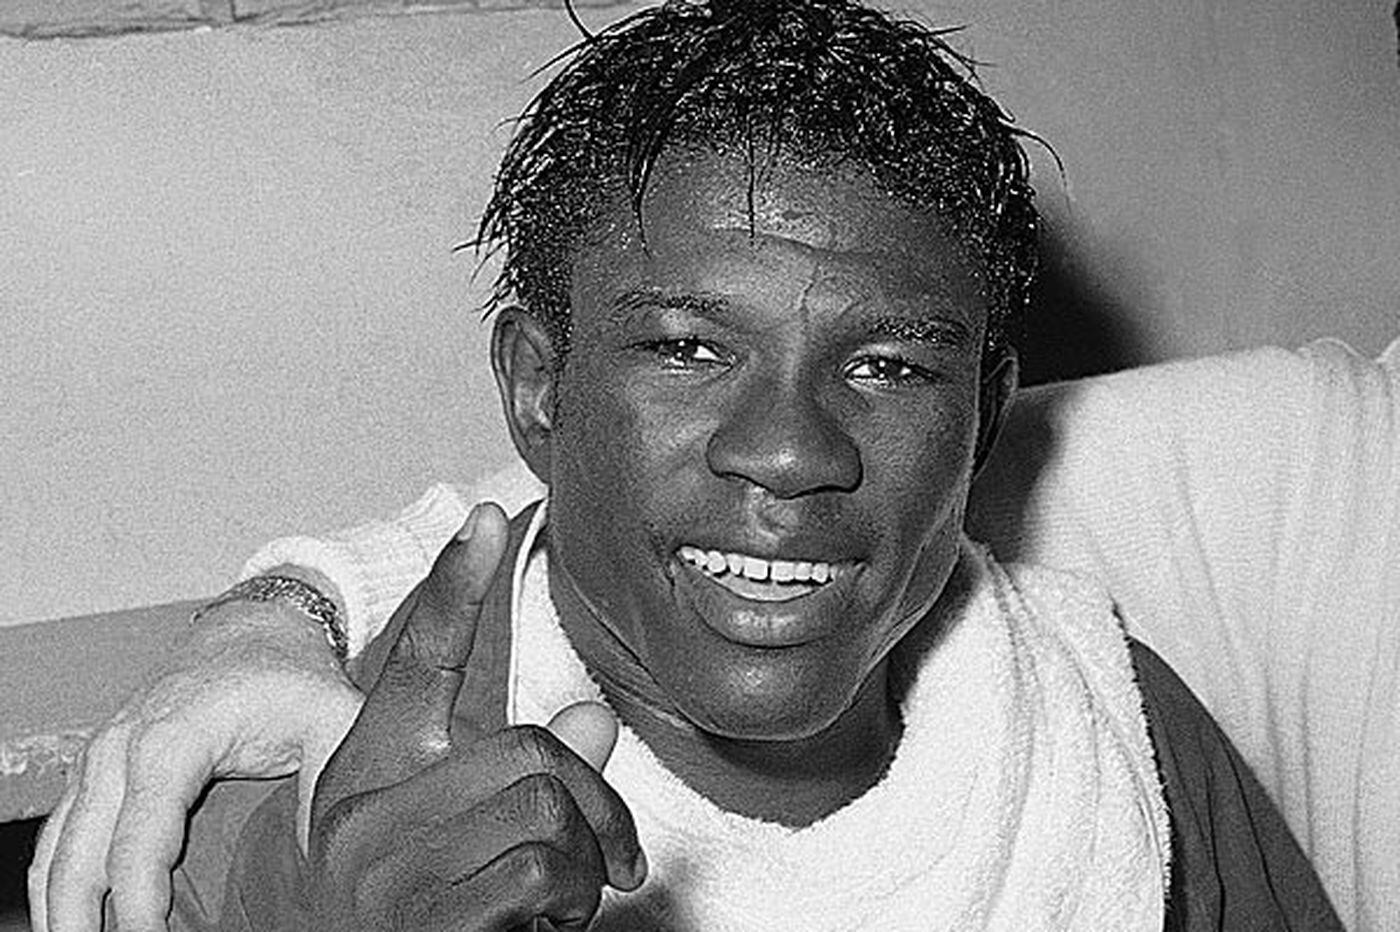 Hall of Fame boxer Griffith dies at 75